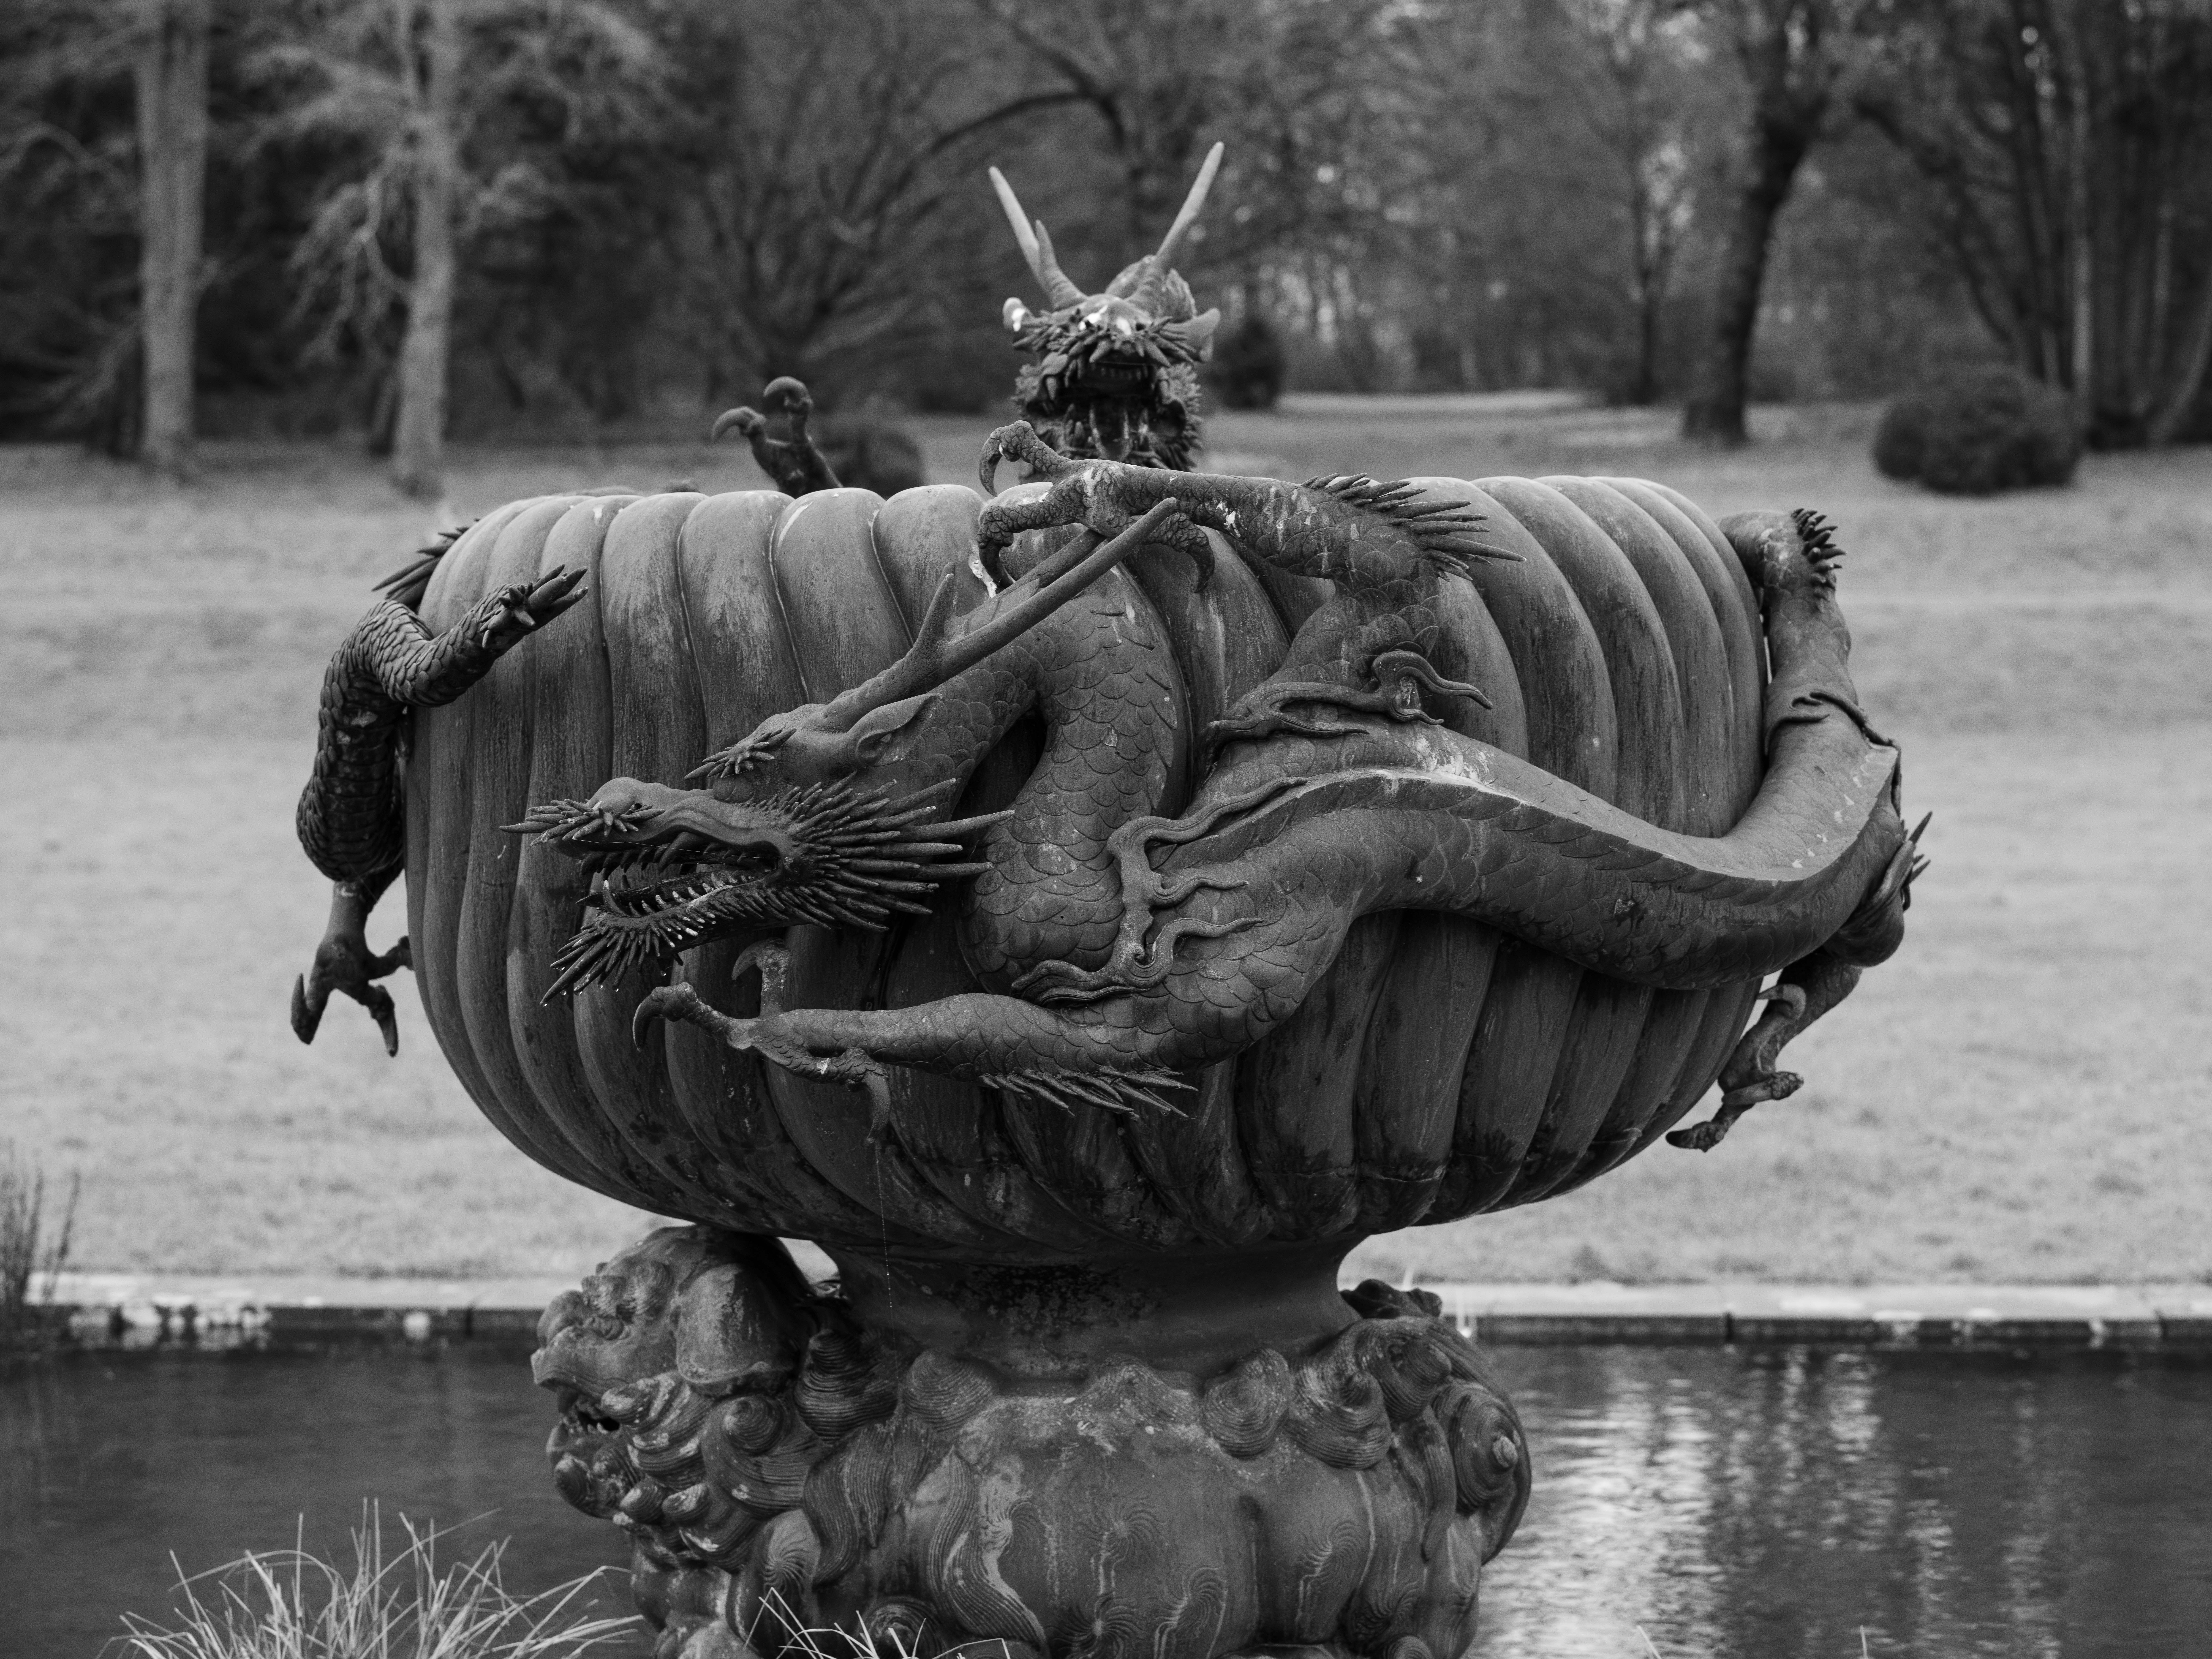 A black and white photo of a large sculpture featuring dragons twisting around a central water bowl.